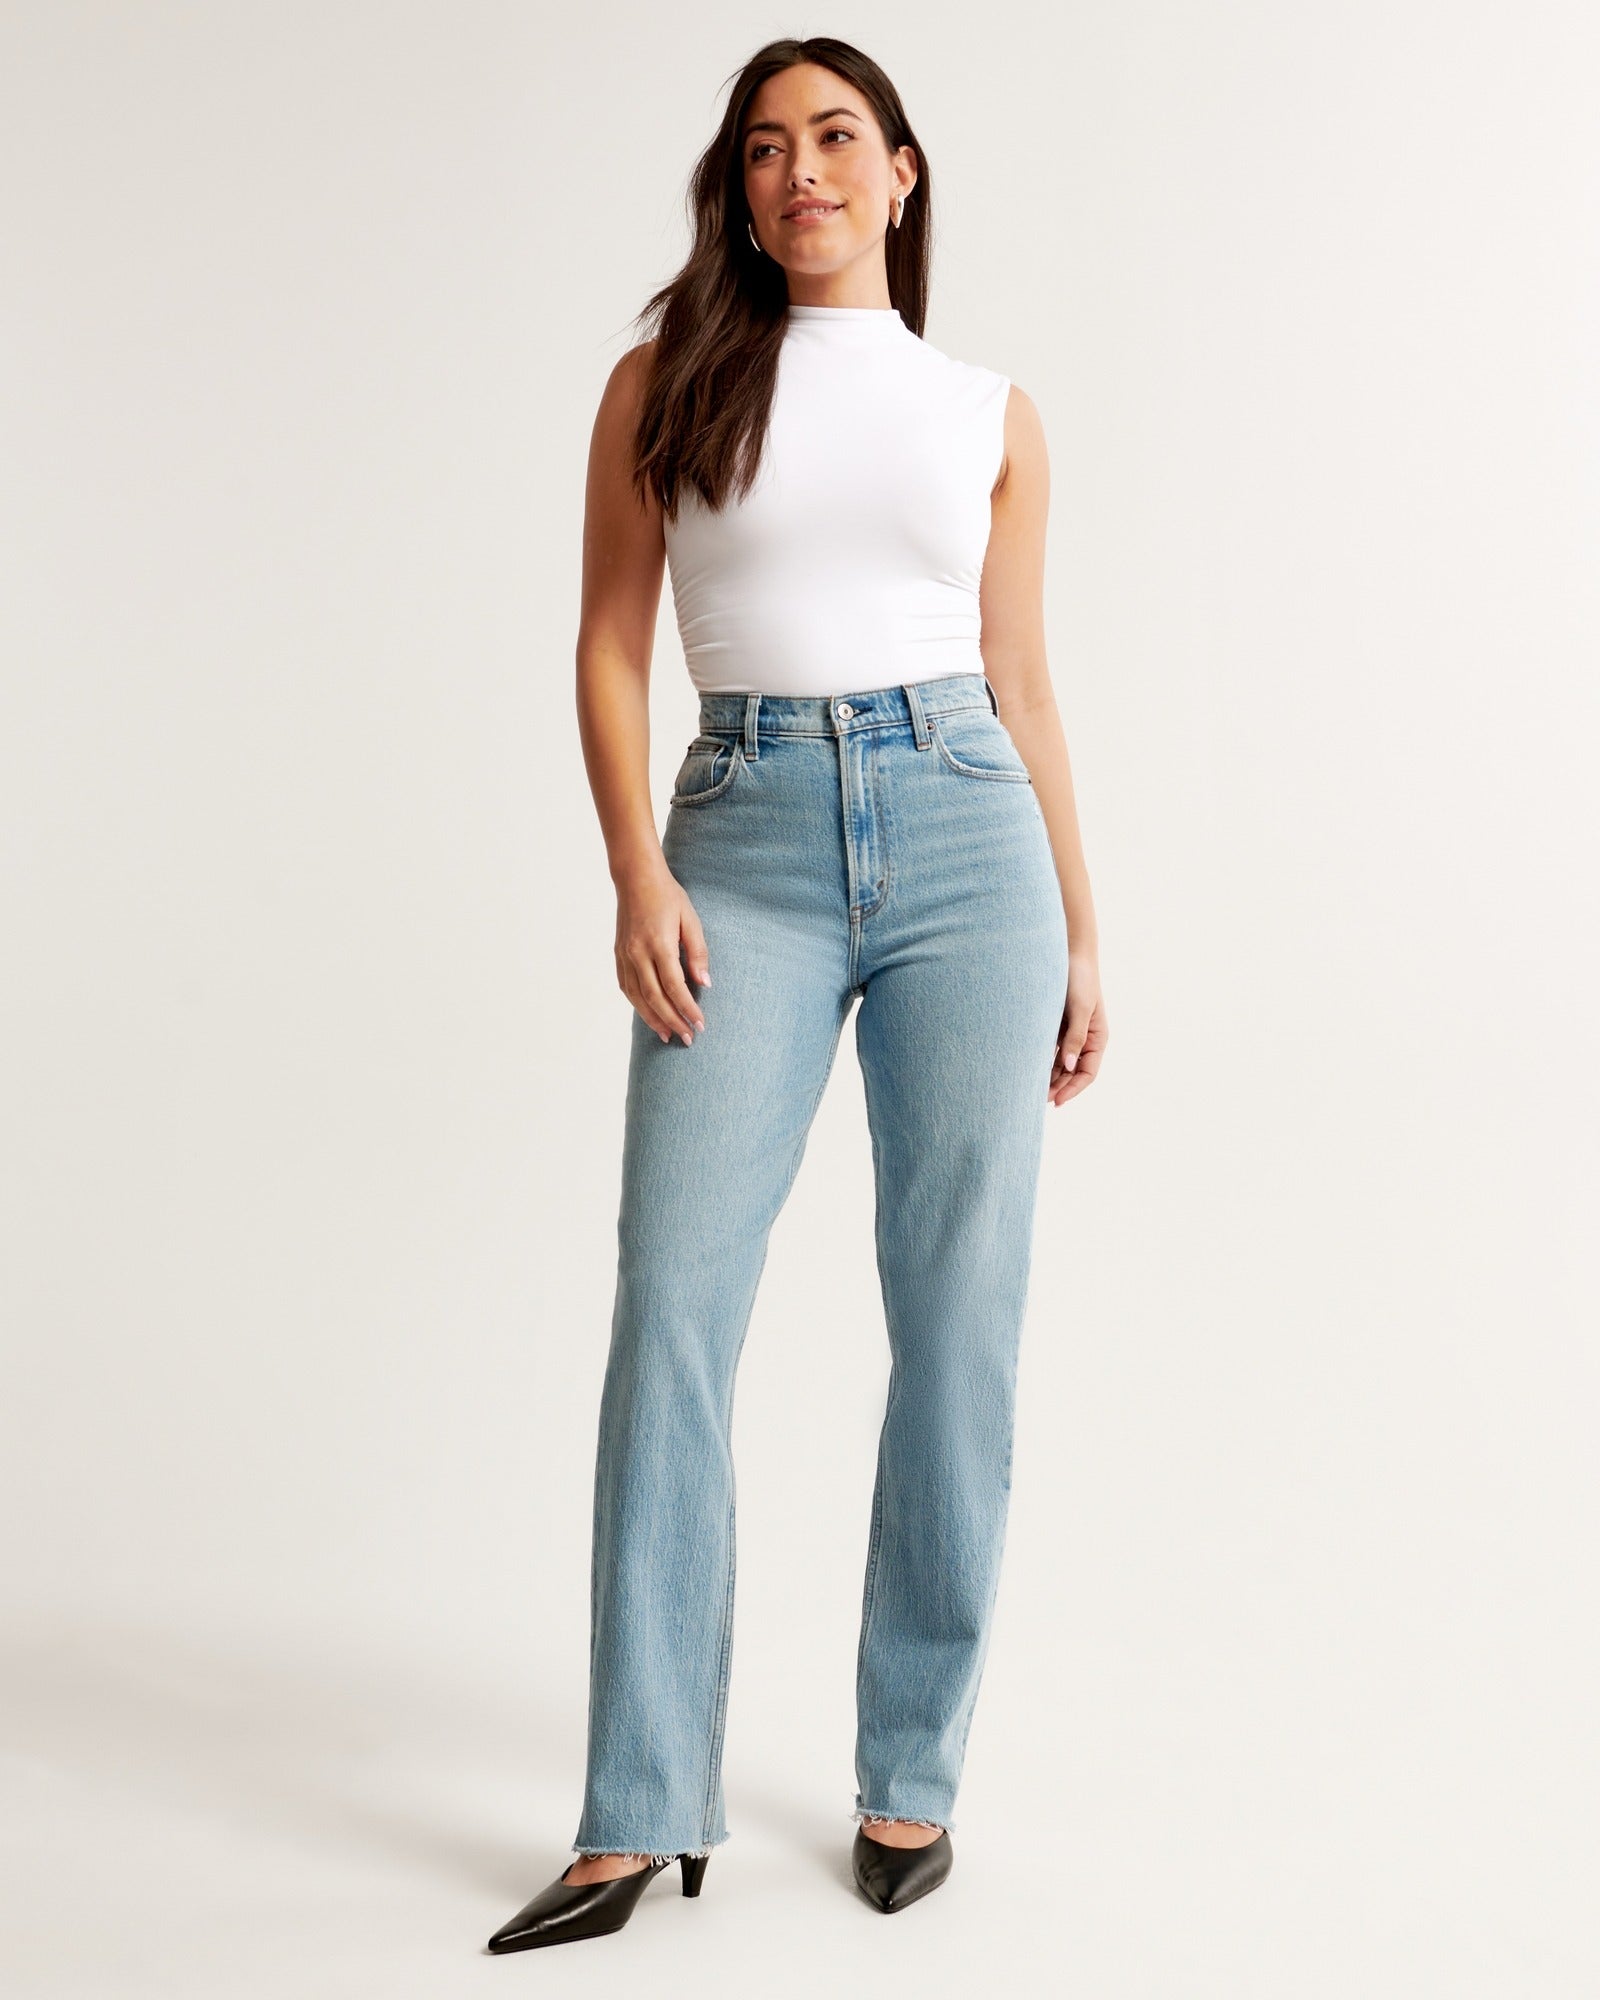 15 Pairs of Jeans That Instantly Make You Look 10 Pounds Thinner